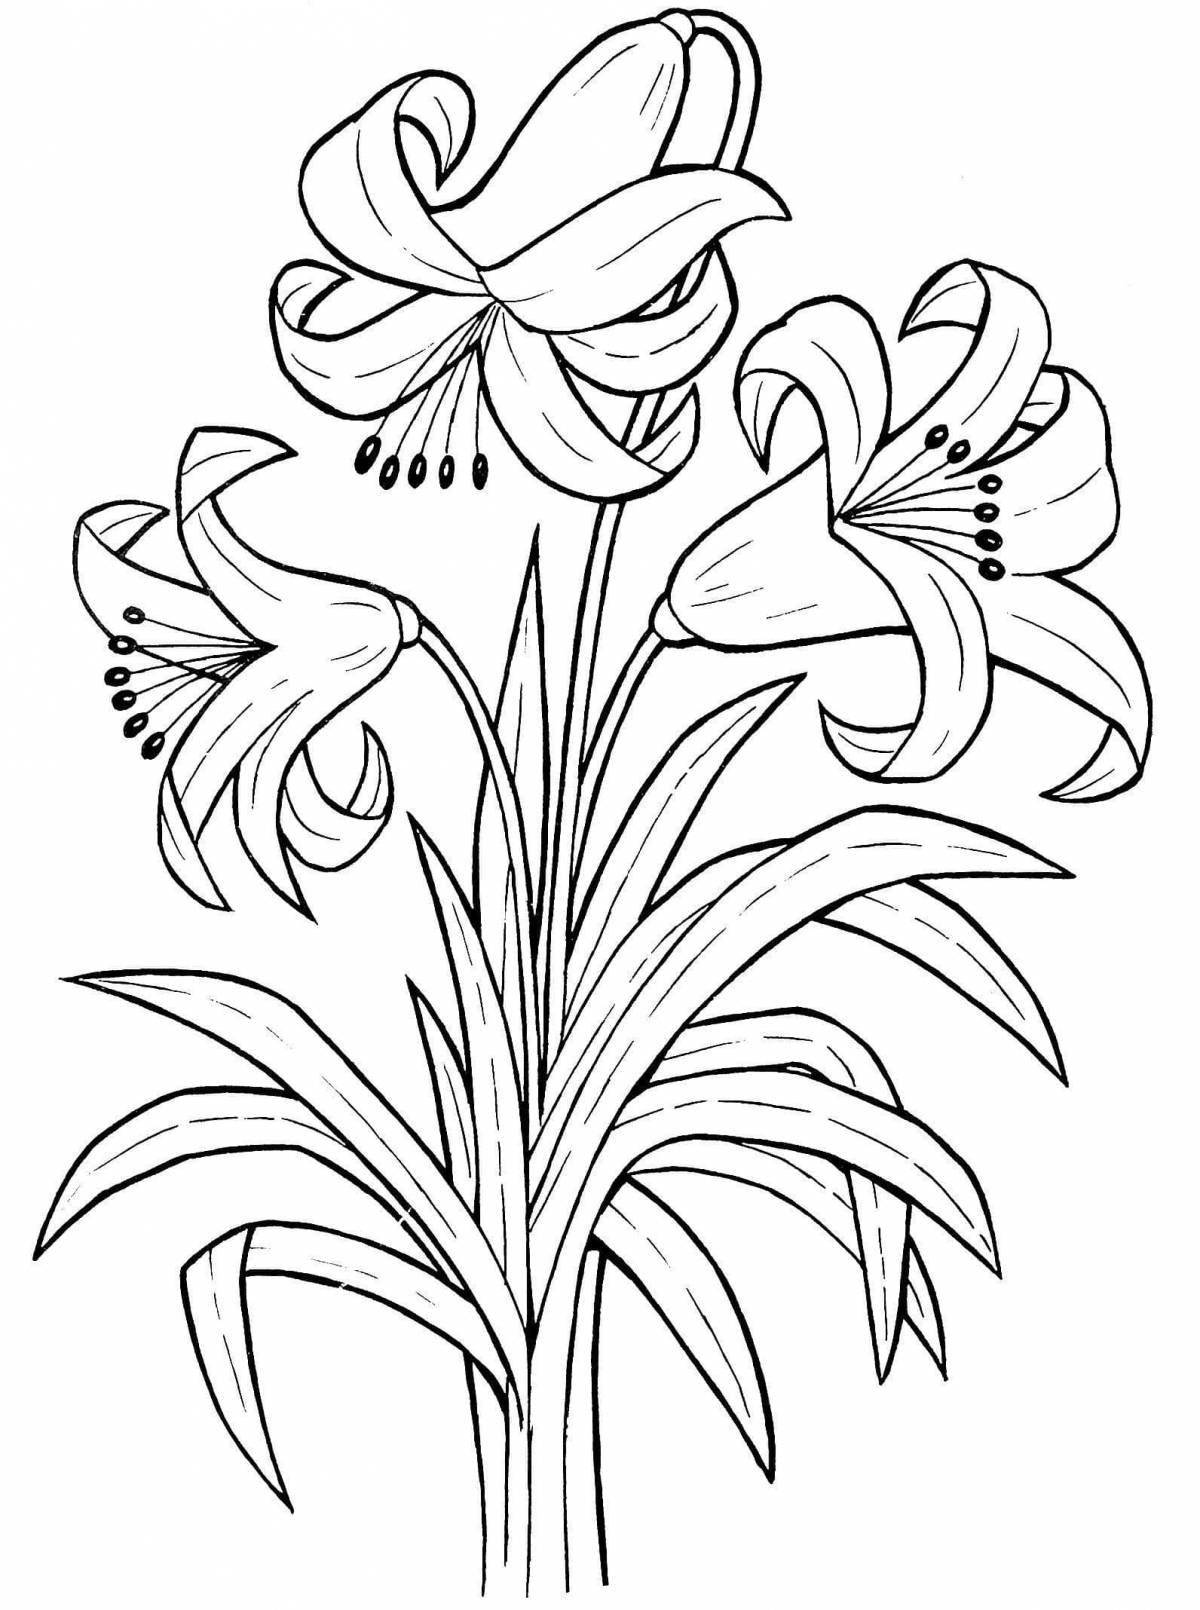 Exciting lily coloring book for kids